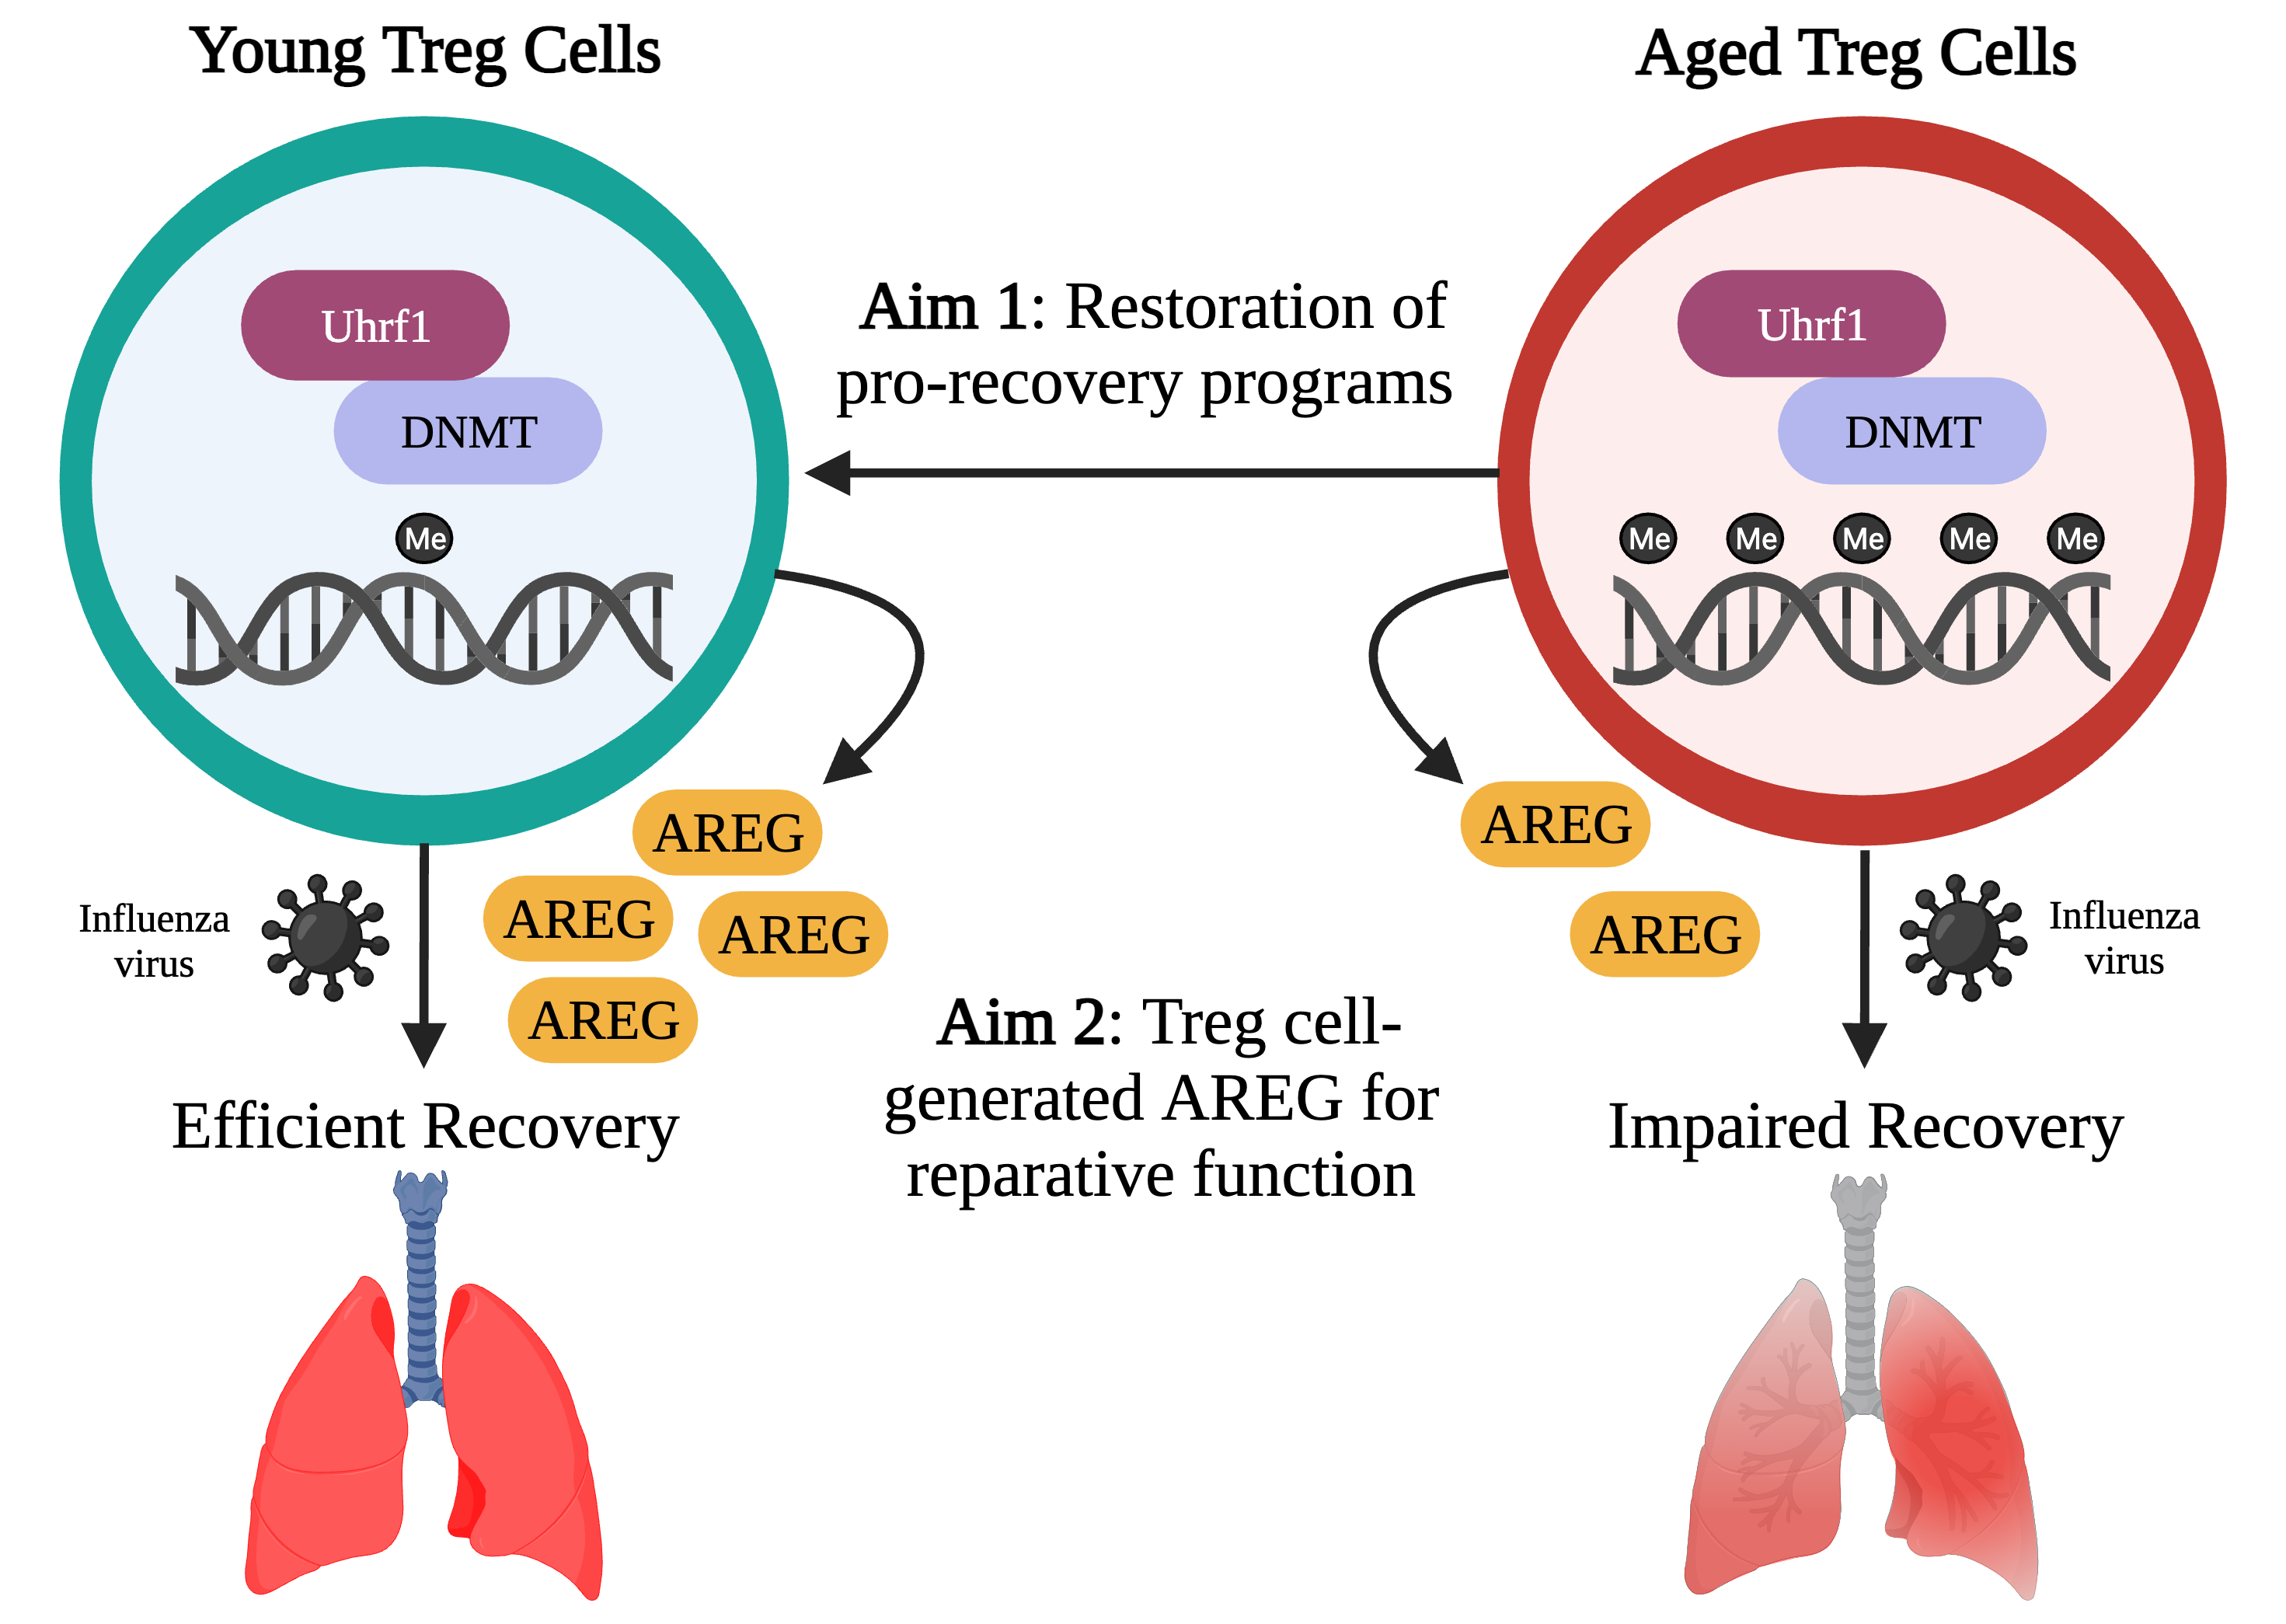 Diagram showing how DNA methyltransferases and UHRF1 affect amphiregulin production in young versus aged Treg cells